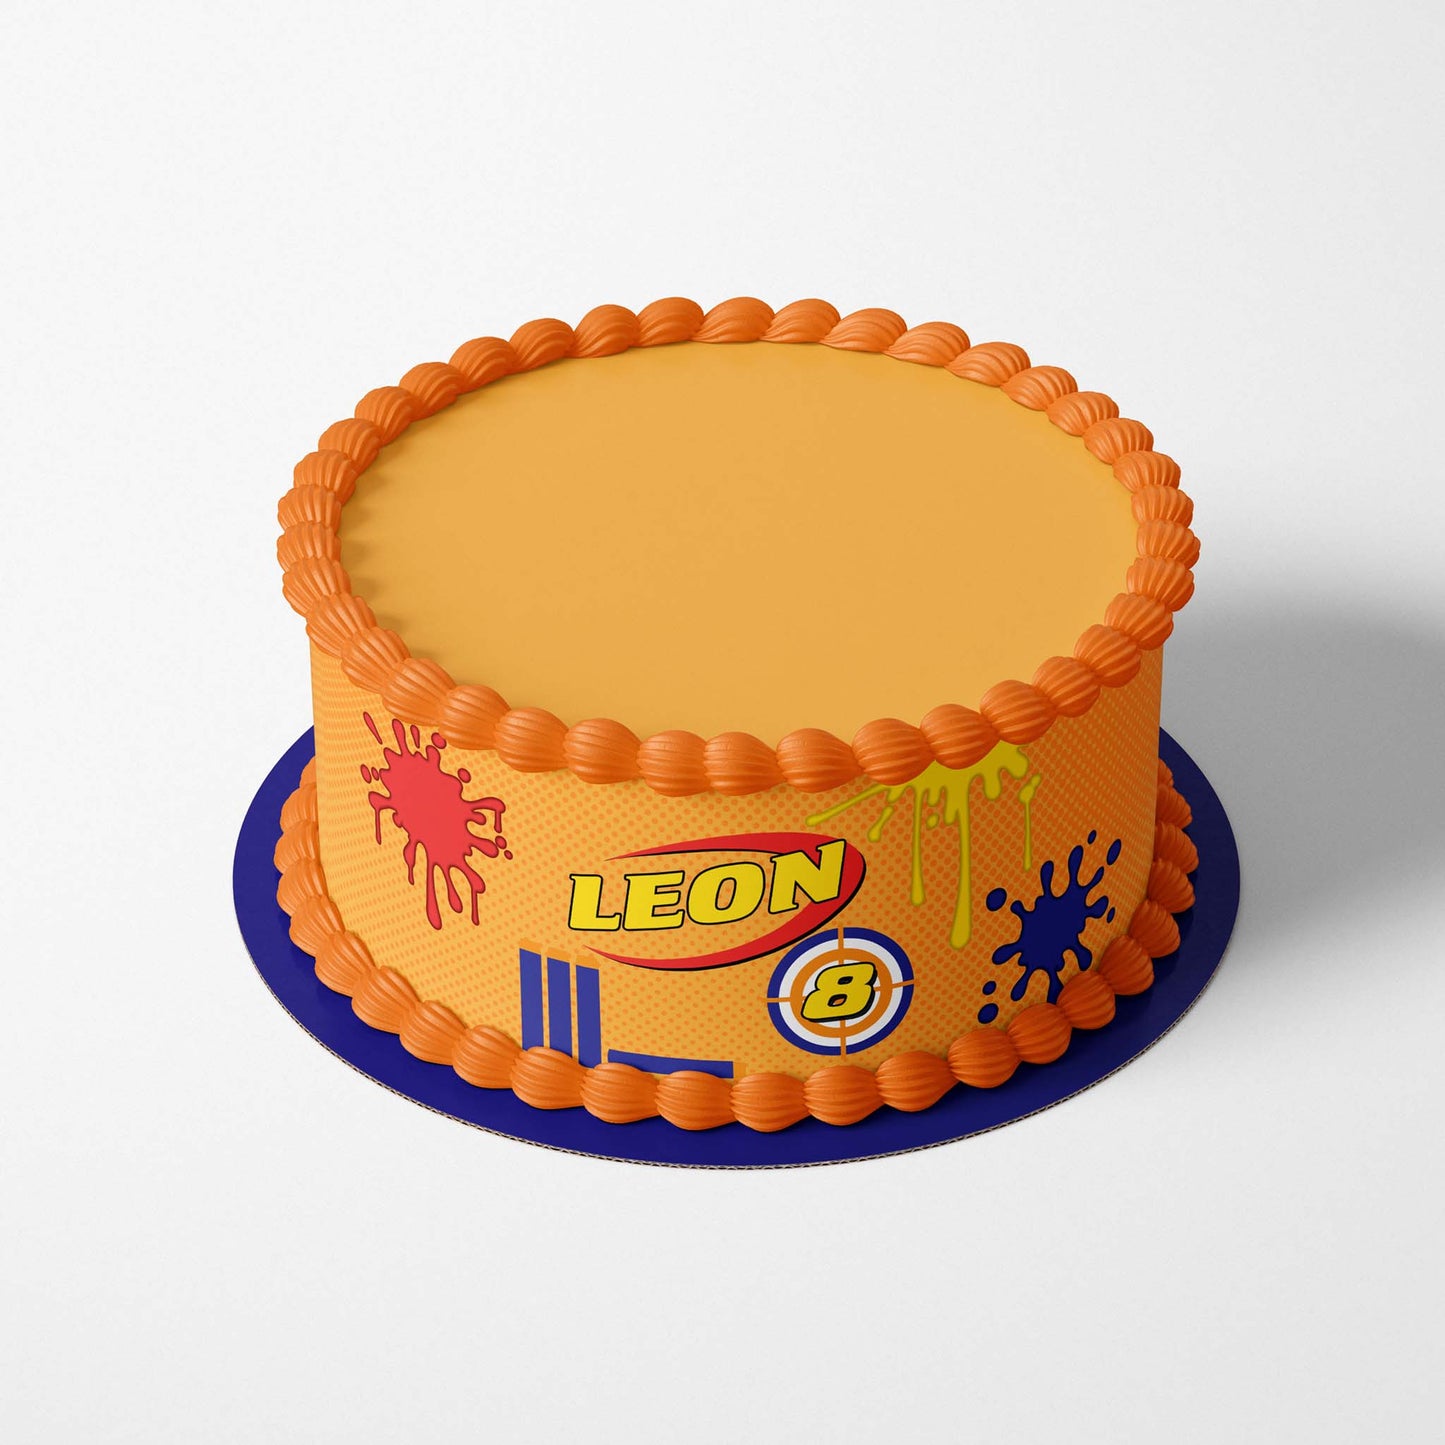 Help any Nerf Gun lover celebrate in style with this fun Nerf Gun-inspired edible icing cake wrap.